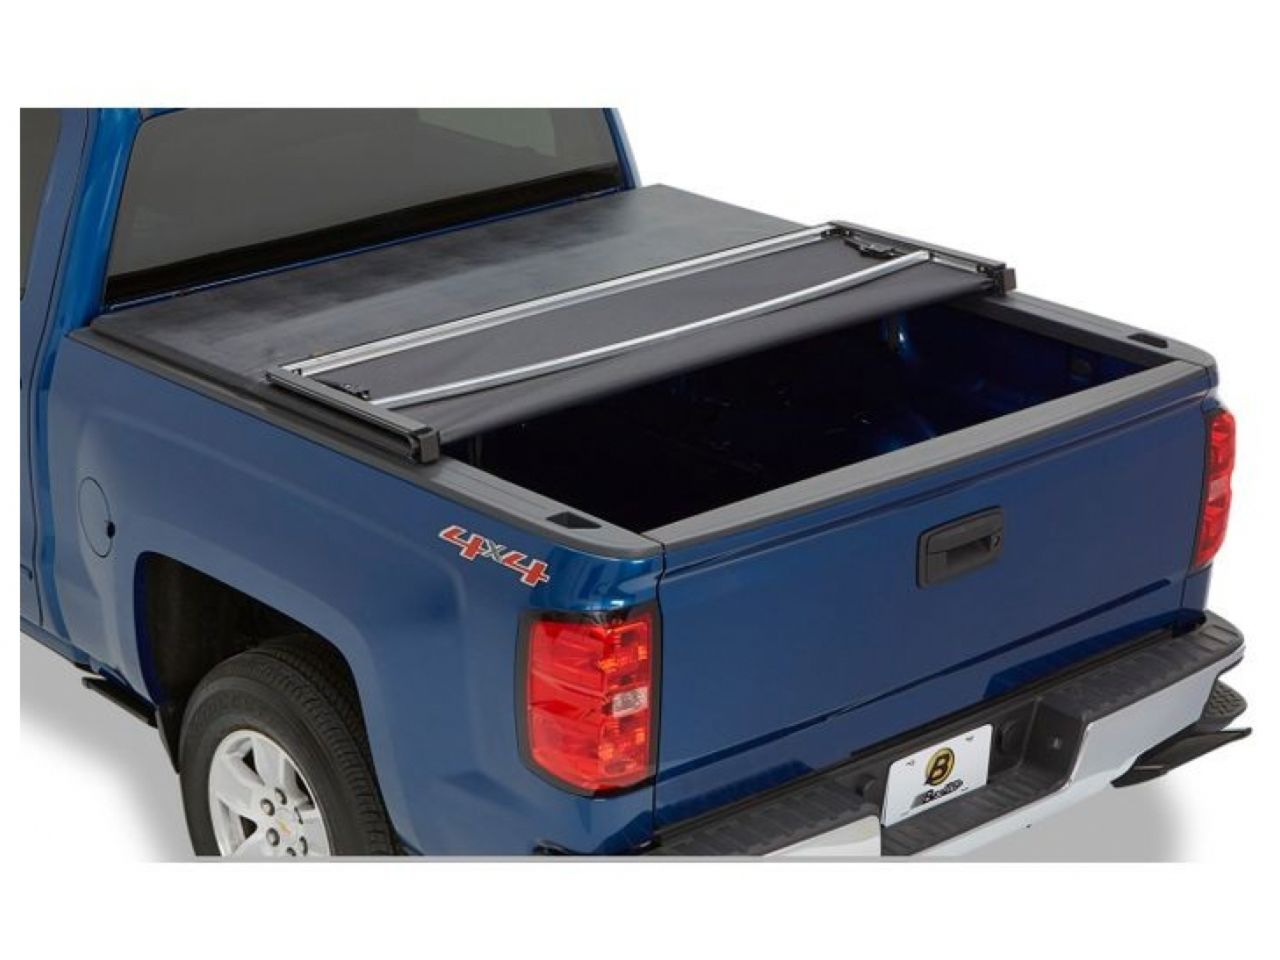 Bestop Toyota 07-16 Tundra Without Deck Rails; 5.5' Bed ,Black,Each